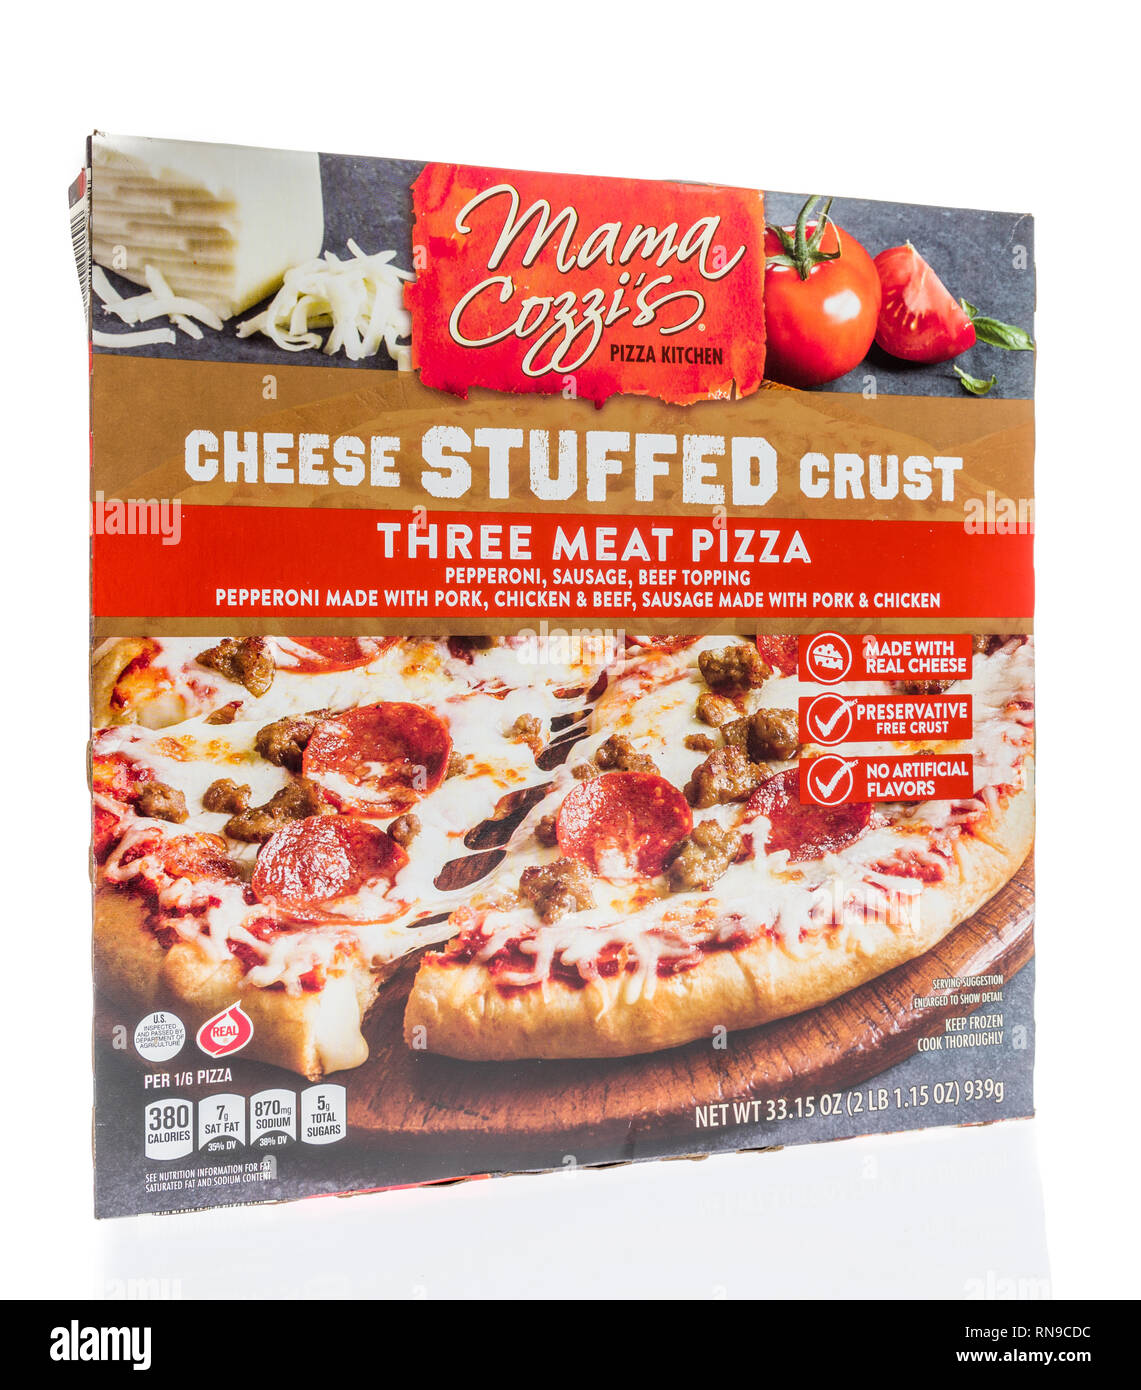 Winneconne, WI - 14 February 2019: A package of Mama Cozzis pizza kitchen cheese stuffed crust frozen pizza on an isolated background Stock Photo